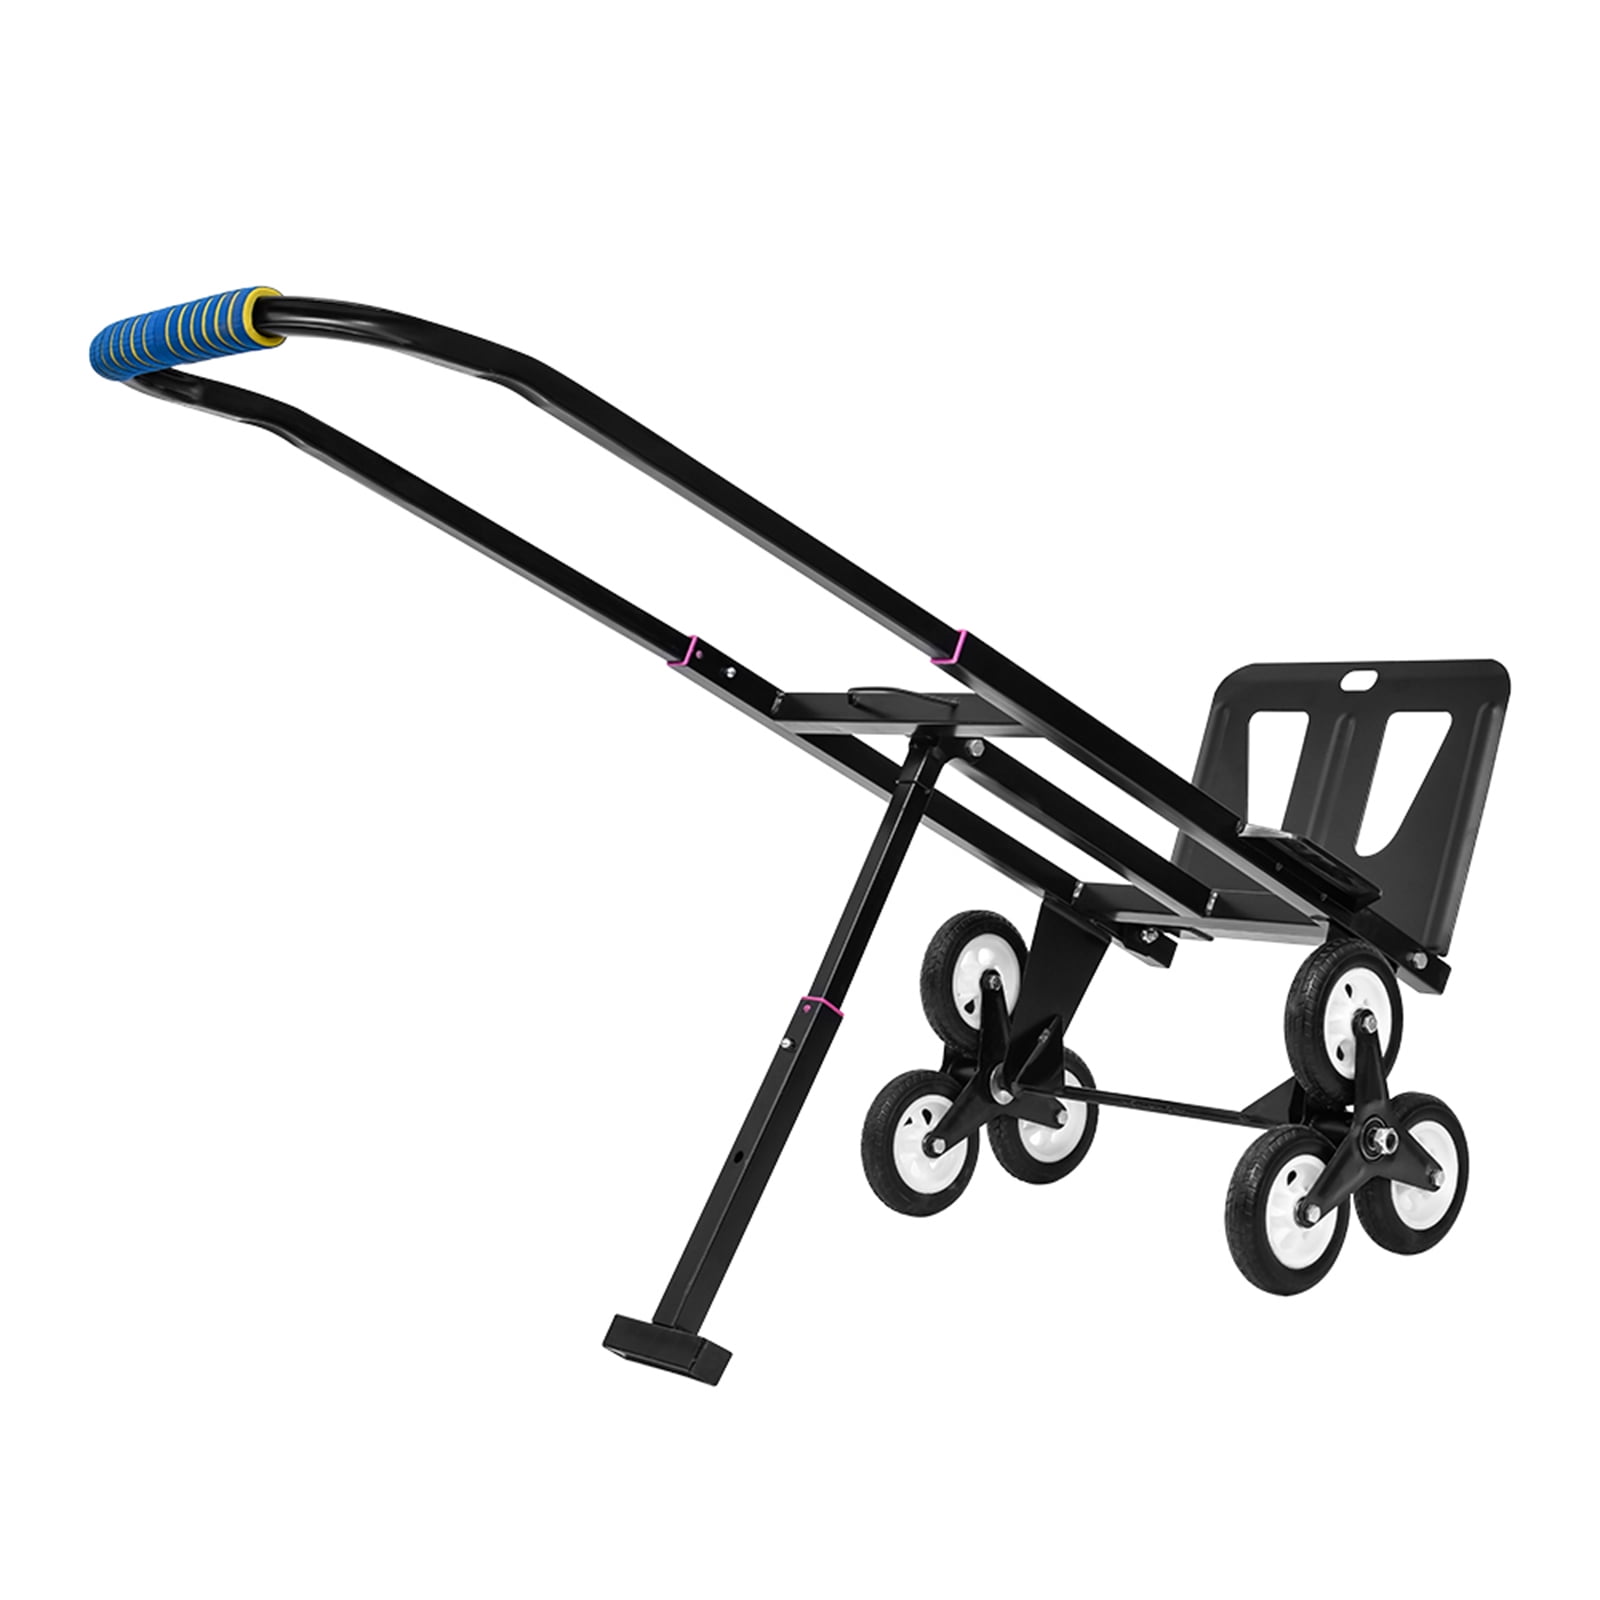 Details about   Trolley Foldable Portable Climbing Hand Truck 6 Wheel Stair Climber Dolly Cart 